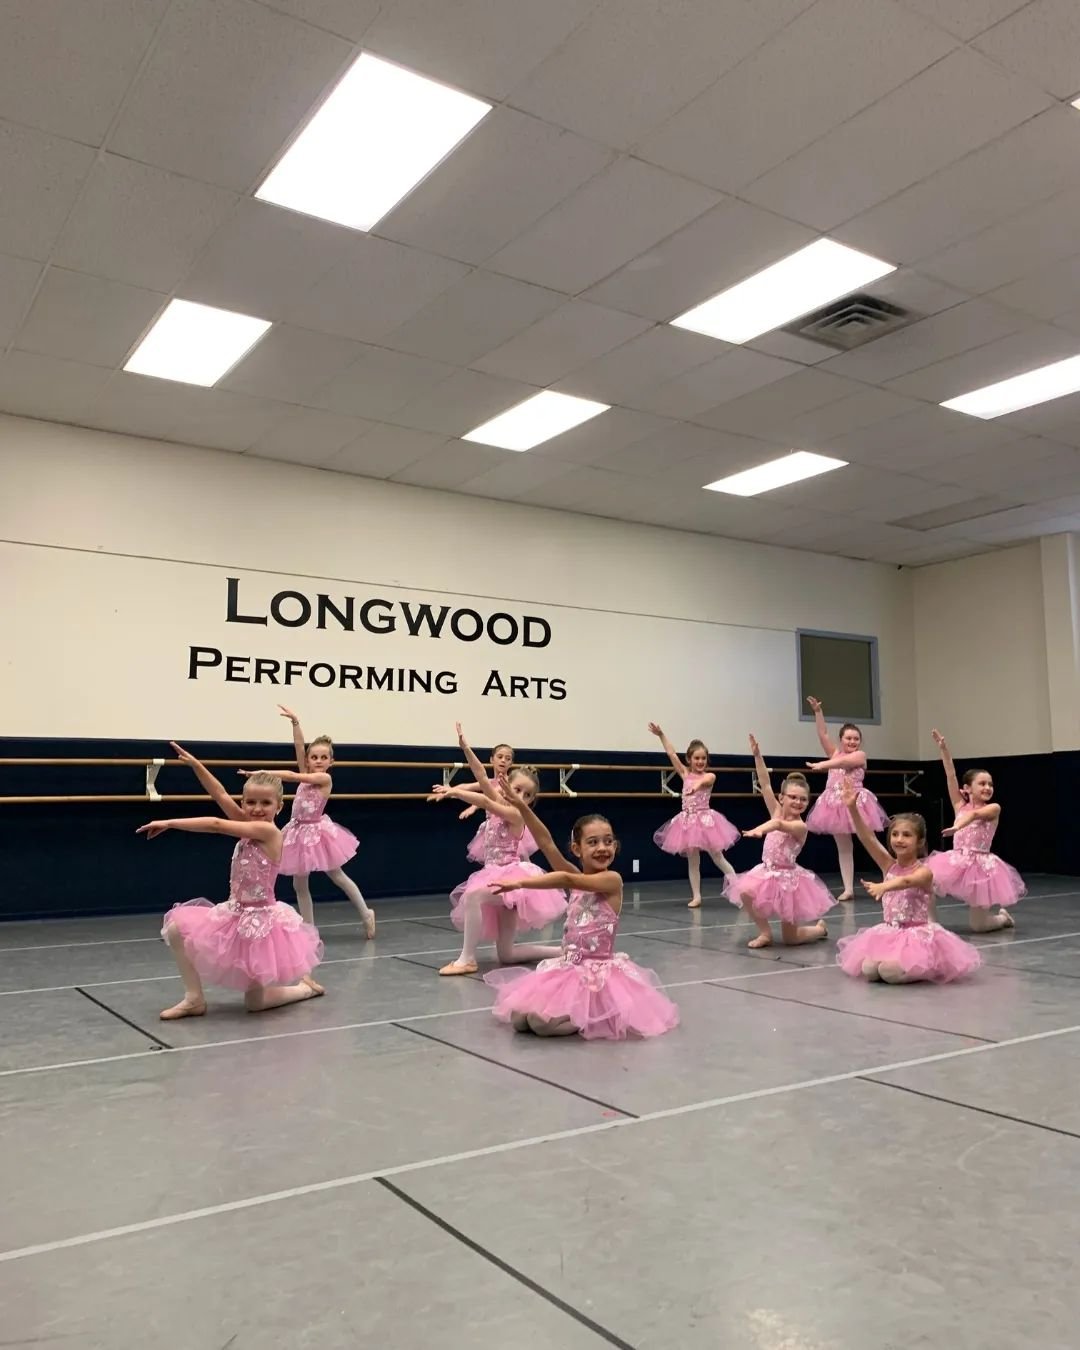 In-Studio dress rehearsal night 1 was a major success!

Can't wait to see these dancers on stage next week!!!

#longwoodperformingarts #lpaalltheway